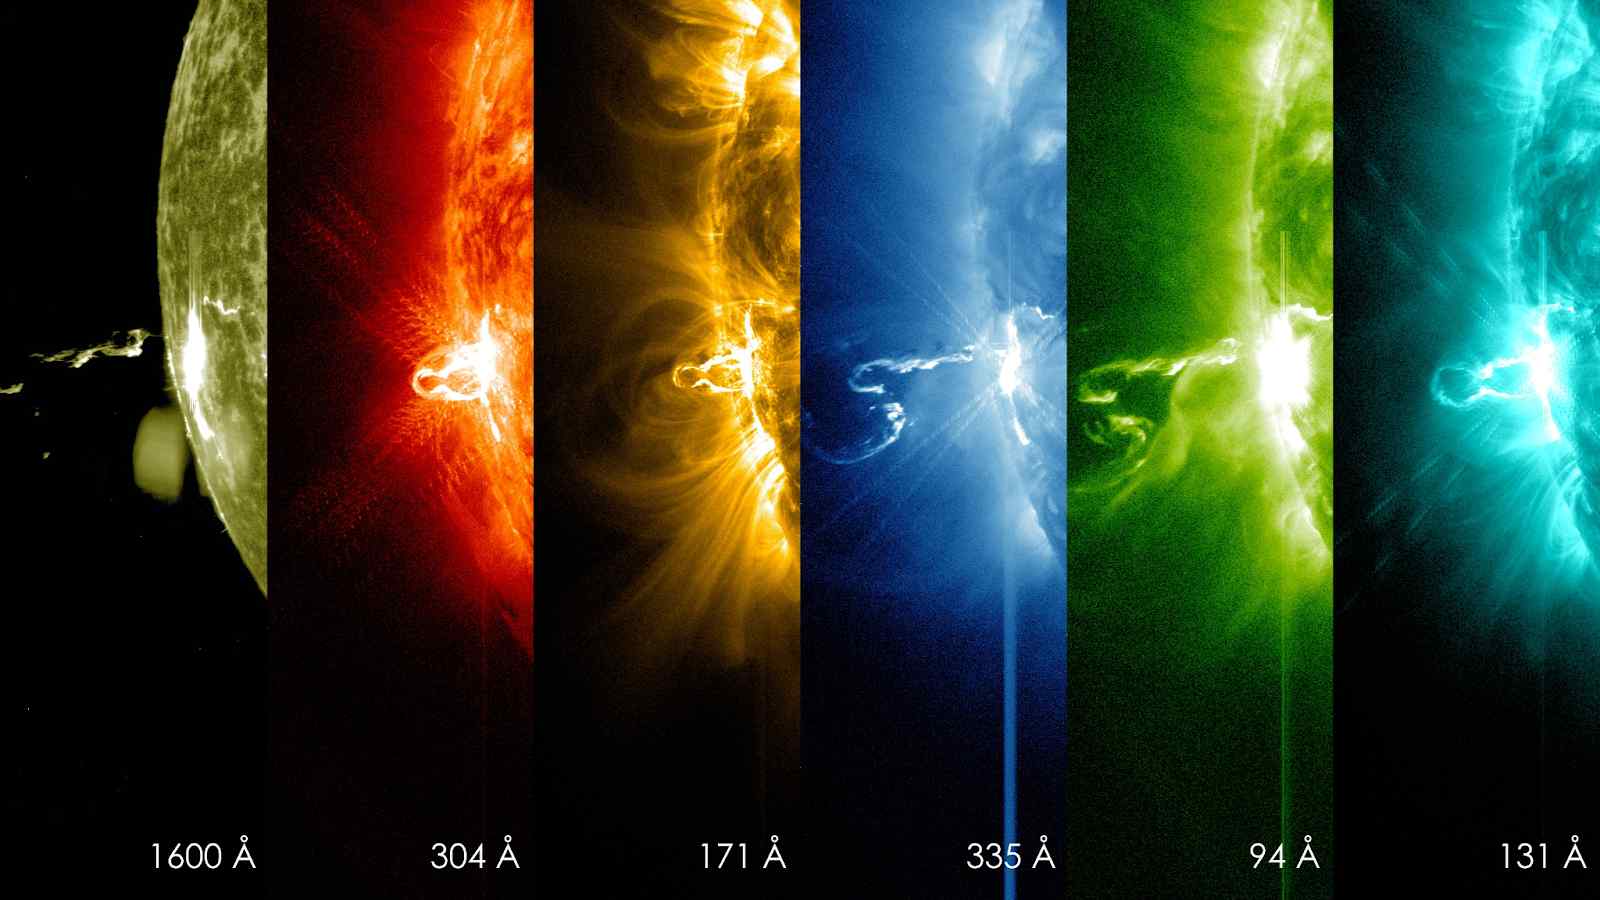 When Did The Largest Solar Flare Occur